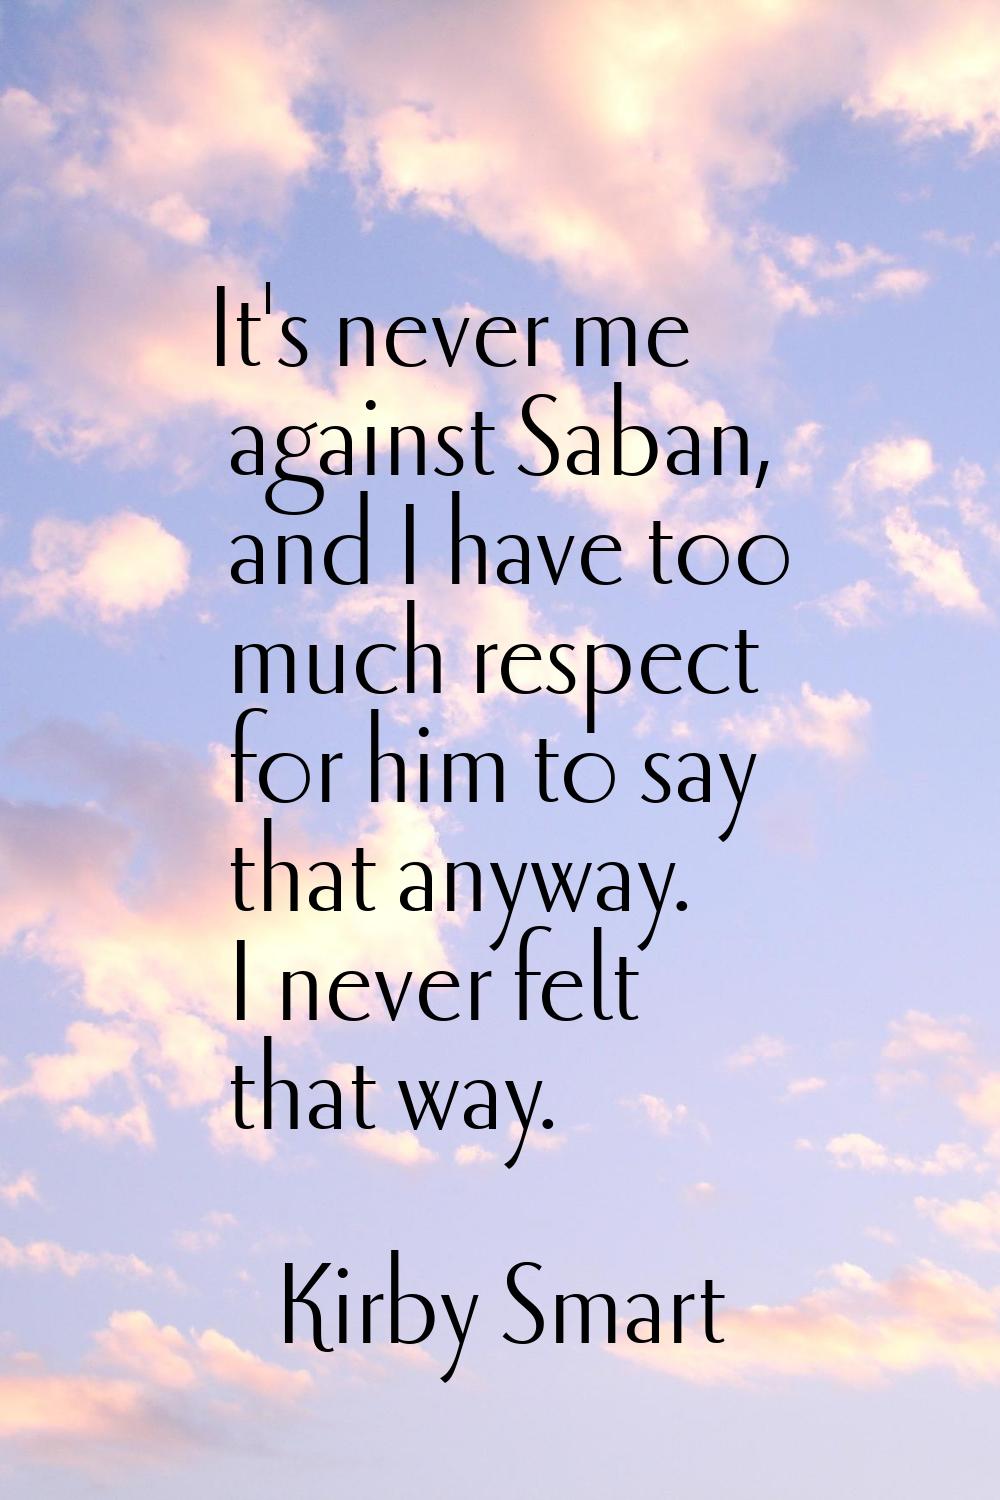 It's never me against Saban, and I have too much respect for him to say that anyway. I never felt t